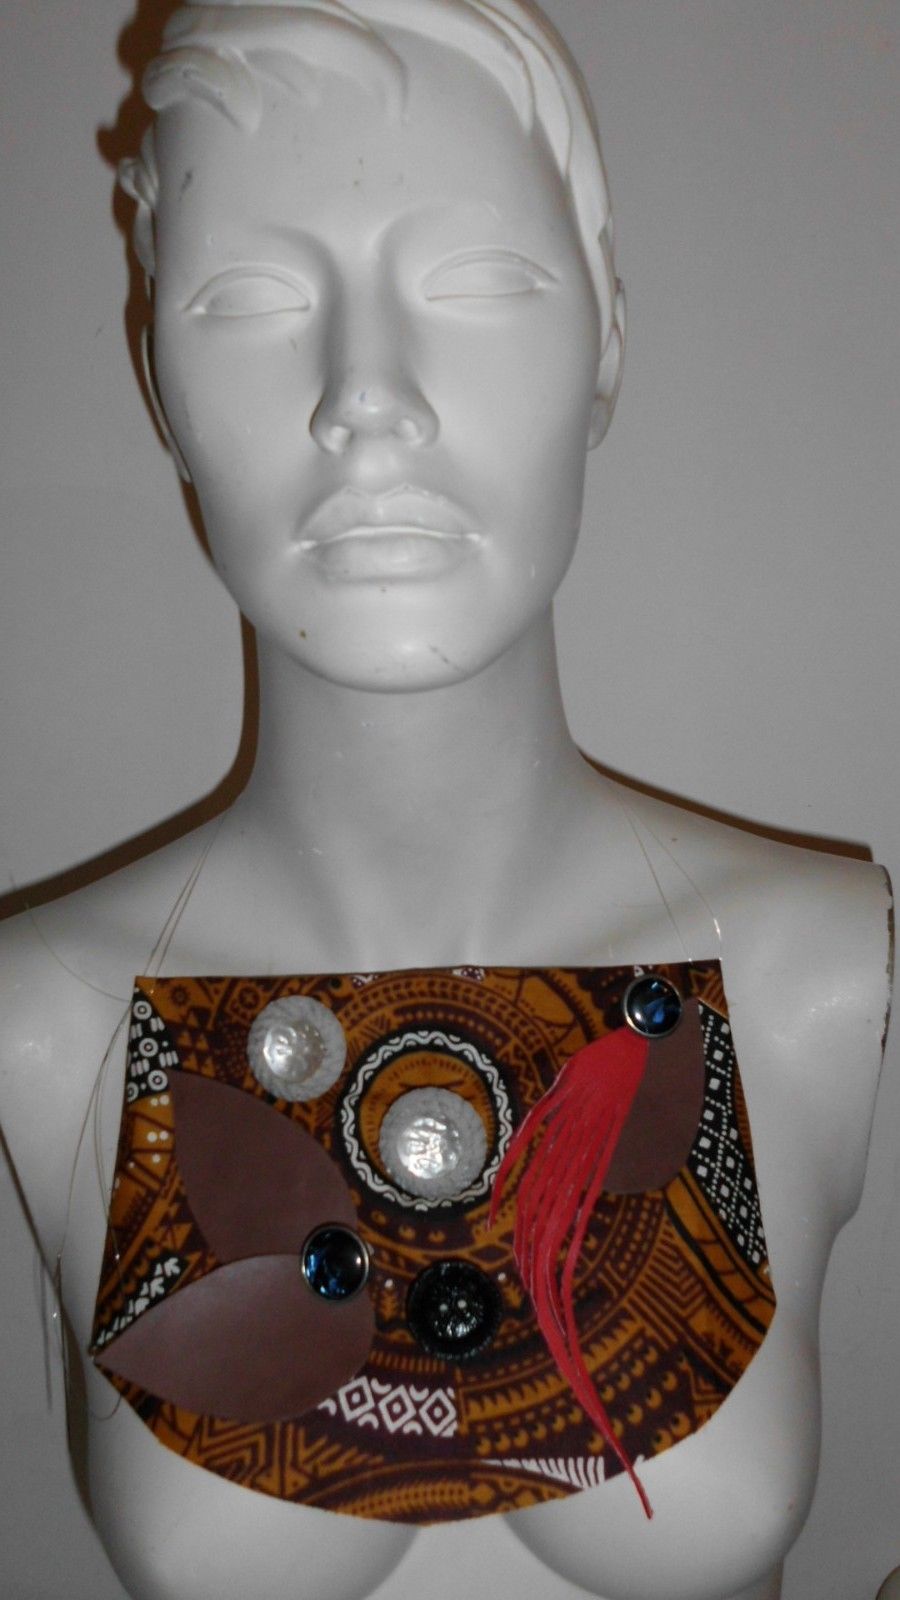 South Africa1 - Gorgeous Costumisable Dashiki African Necklace